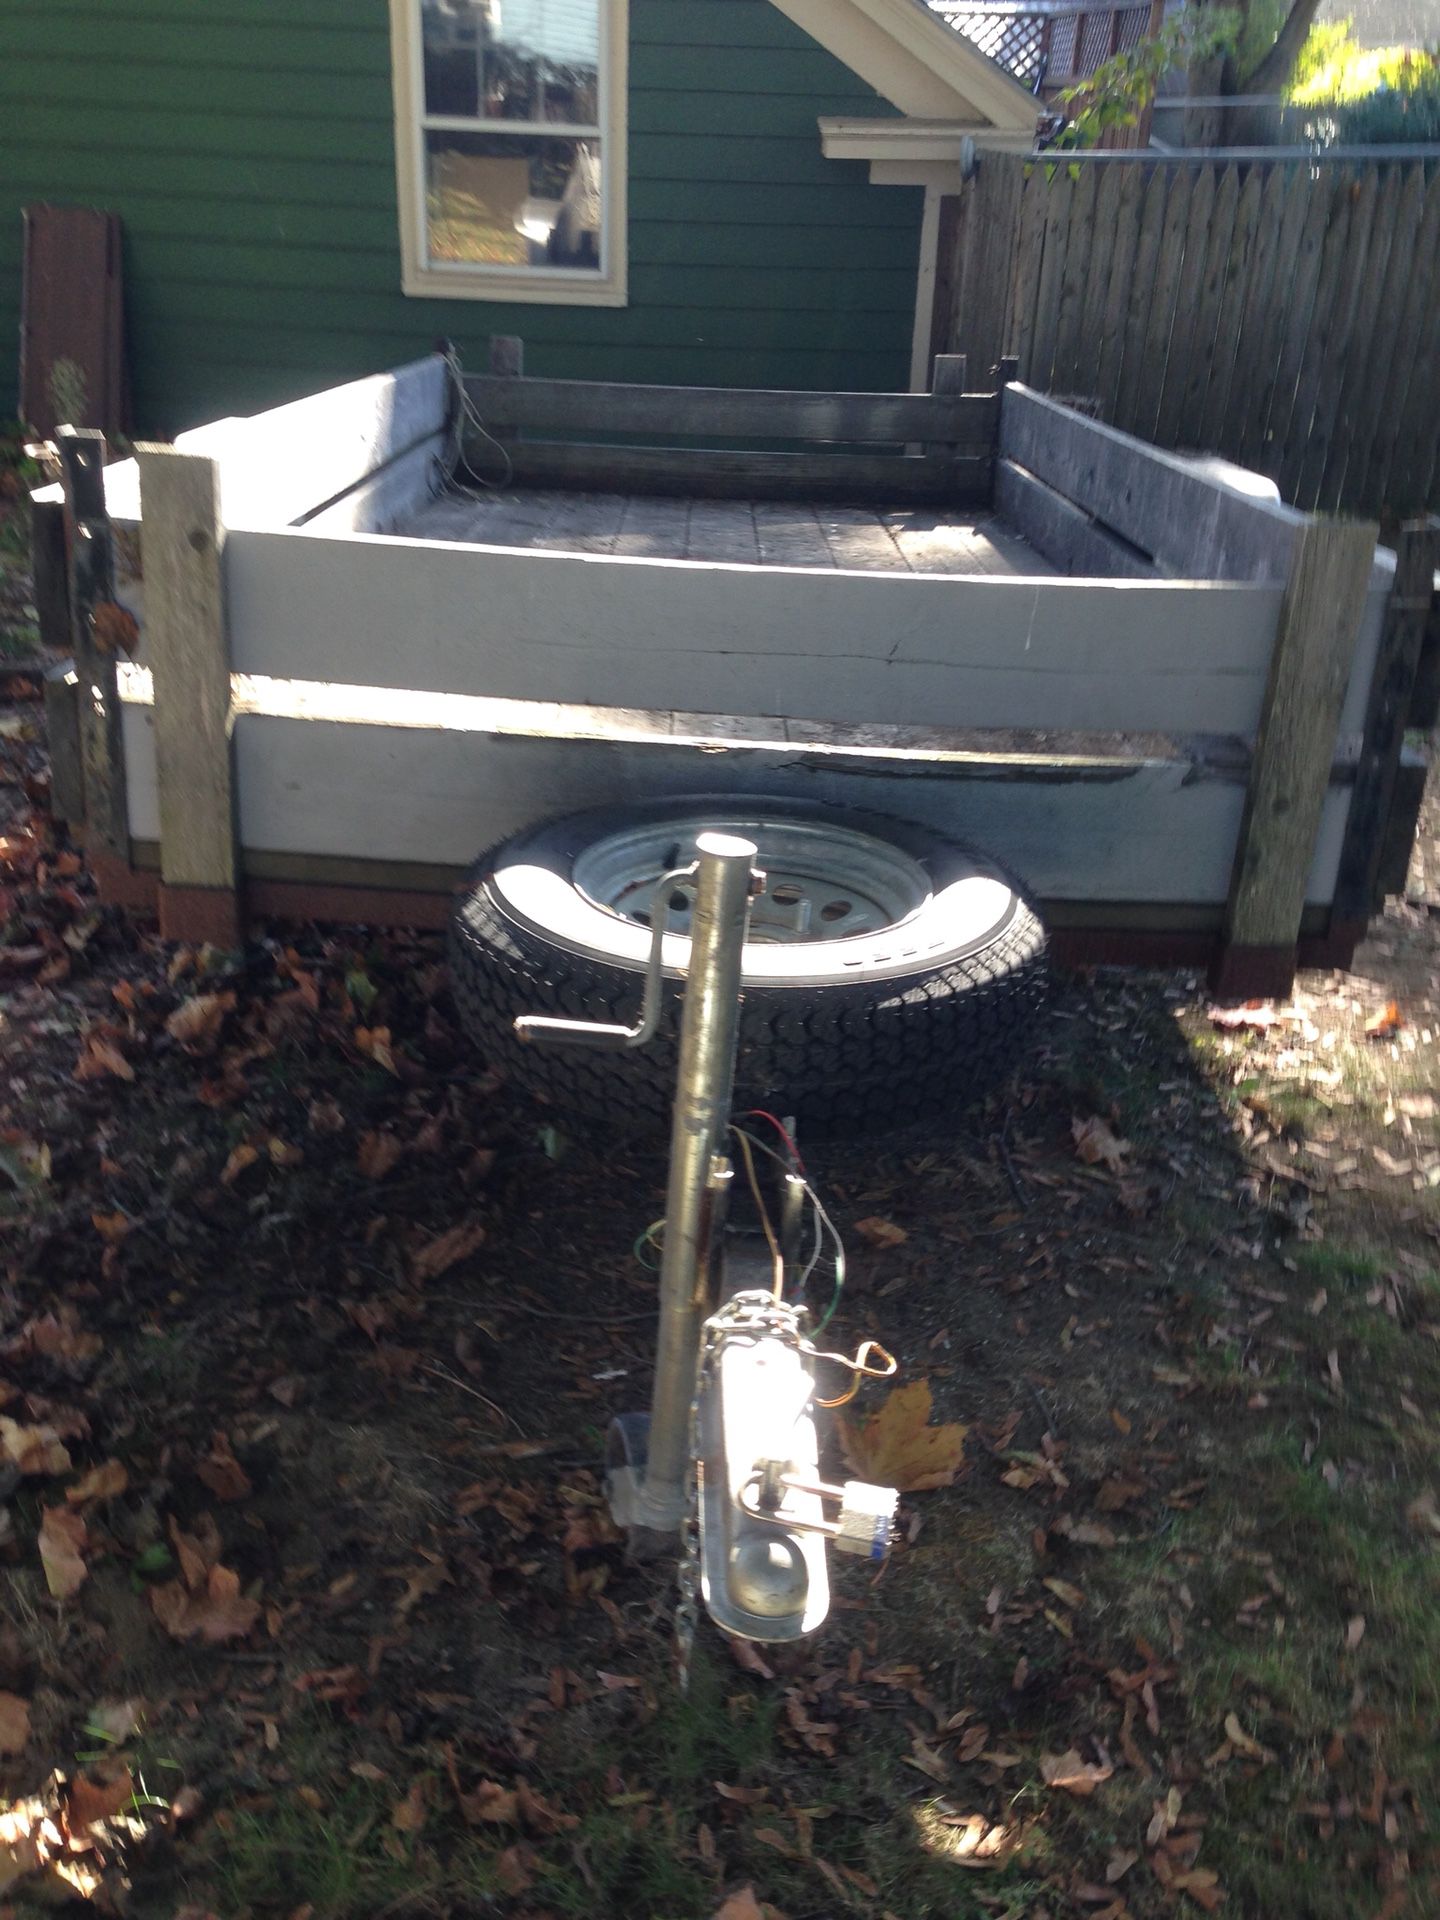 Utility trailer- looking for a good home, ready to be used. See it to appreciate it.